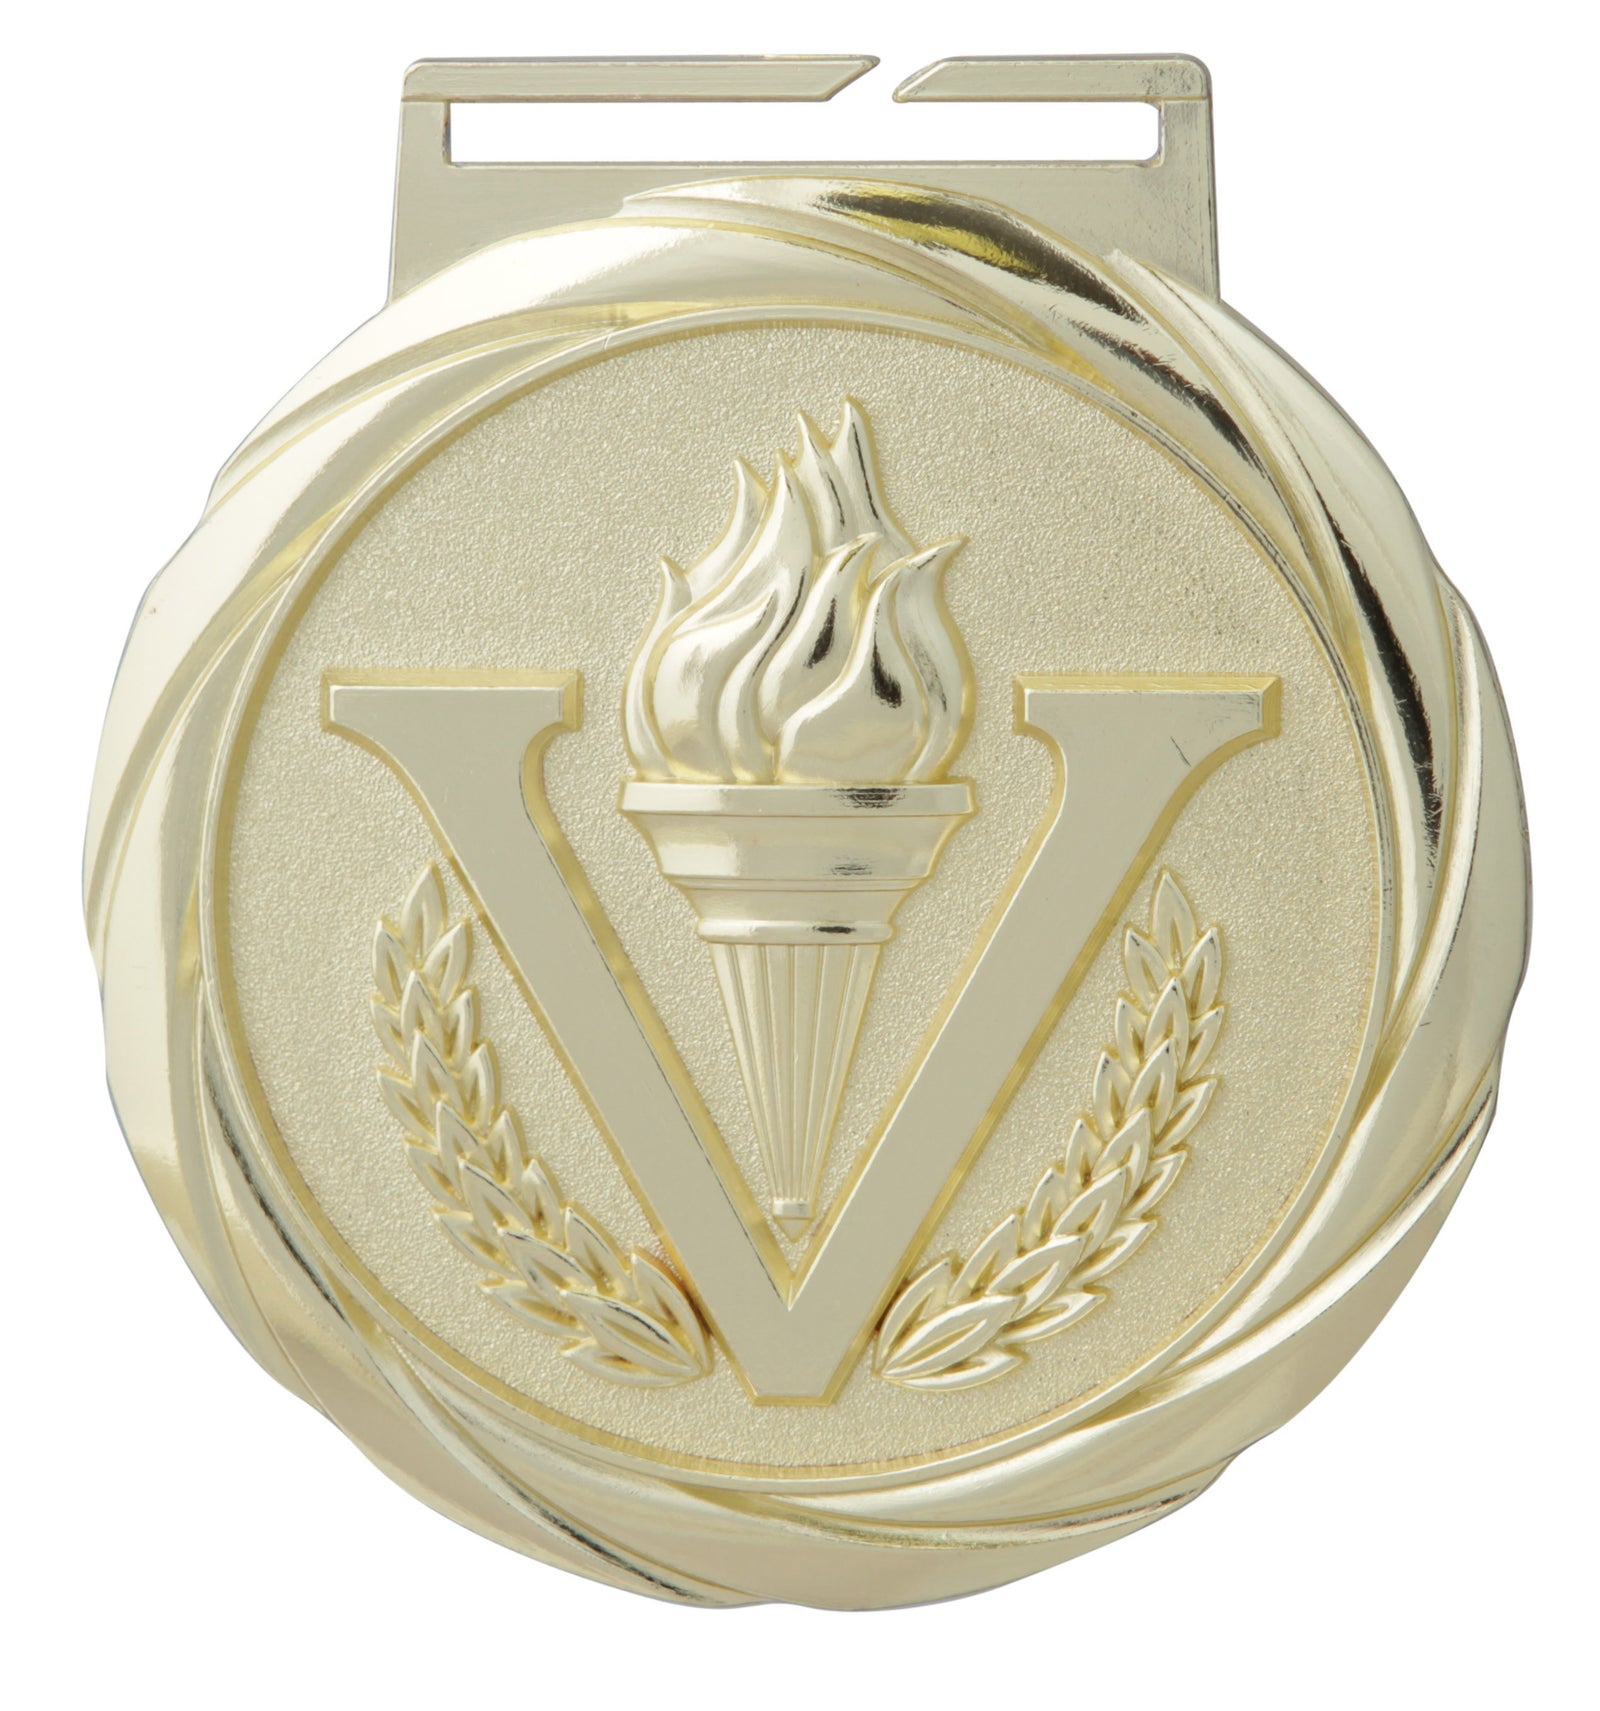 Olympic Style Medal - Victory Torch